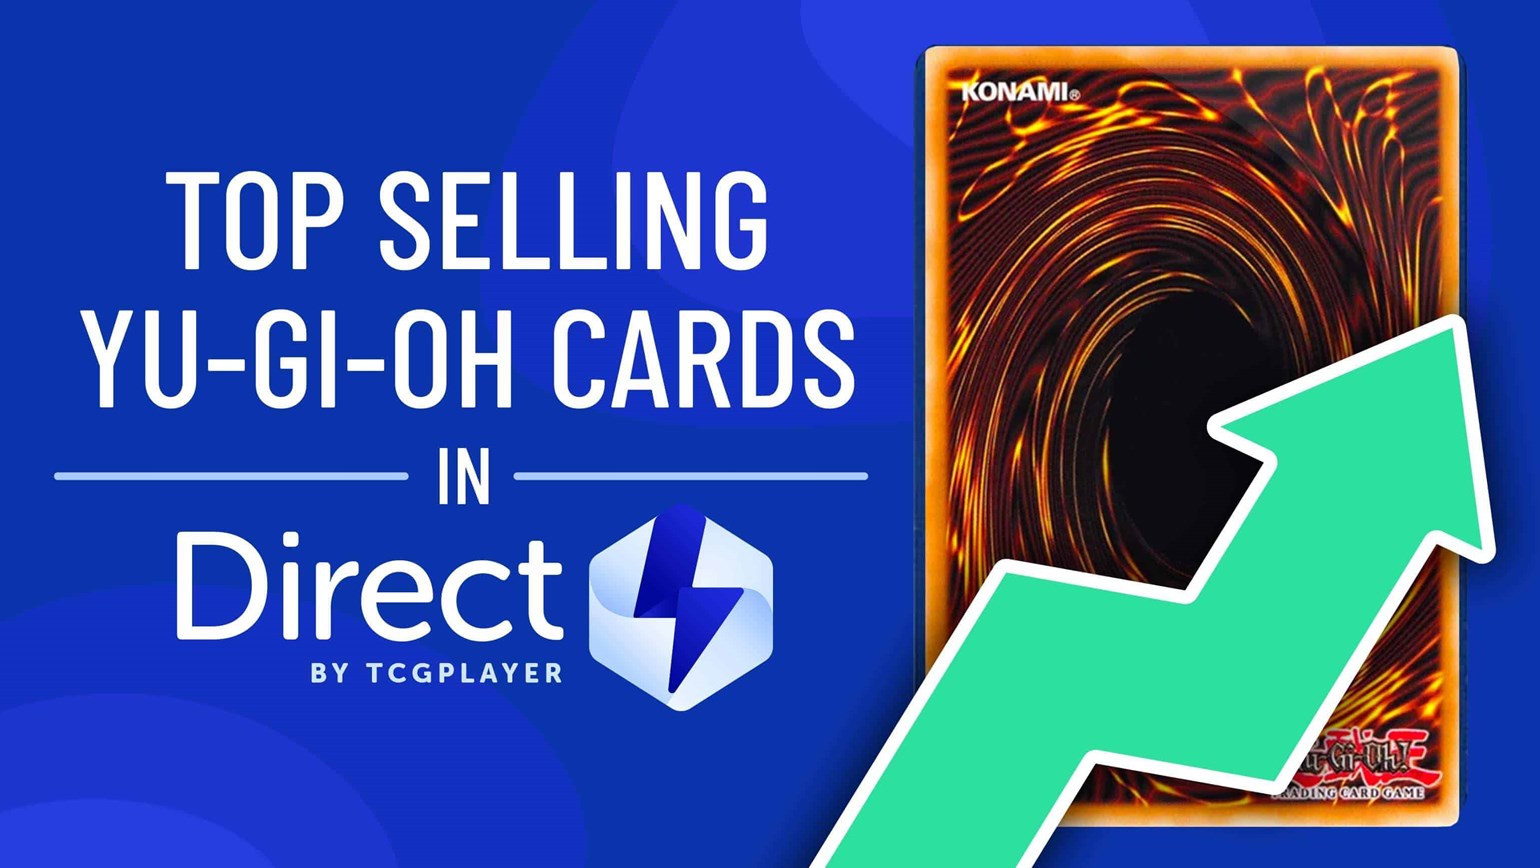 August Top Selling Yu-Gi-Oh! Cards Under $25 in Direct by TCGplayer